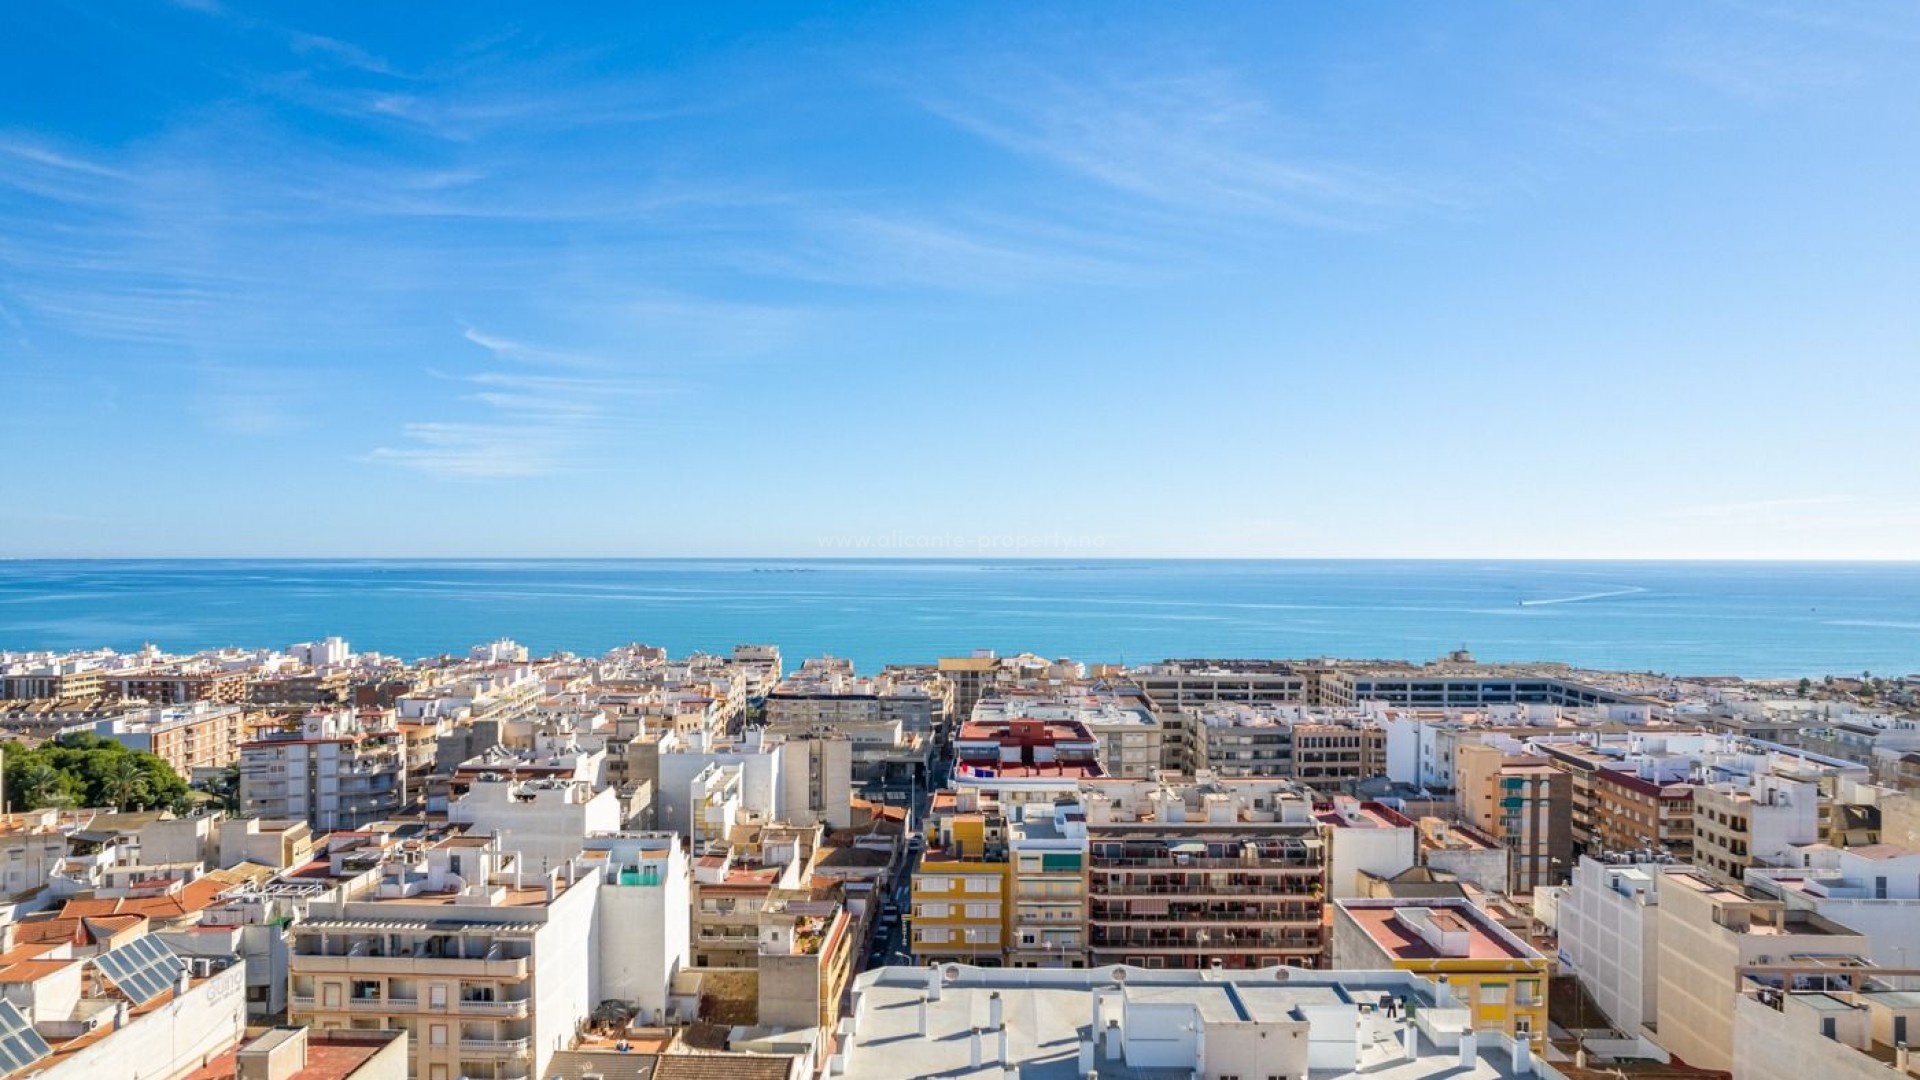 Apartments near the beach in Guardamar de Segura, 2/3 bedrooms, 2 bathrooms, large terraces, all with private solarium and storage room, underground parking